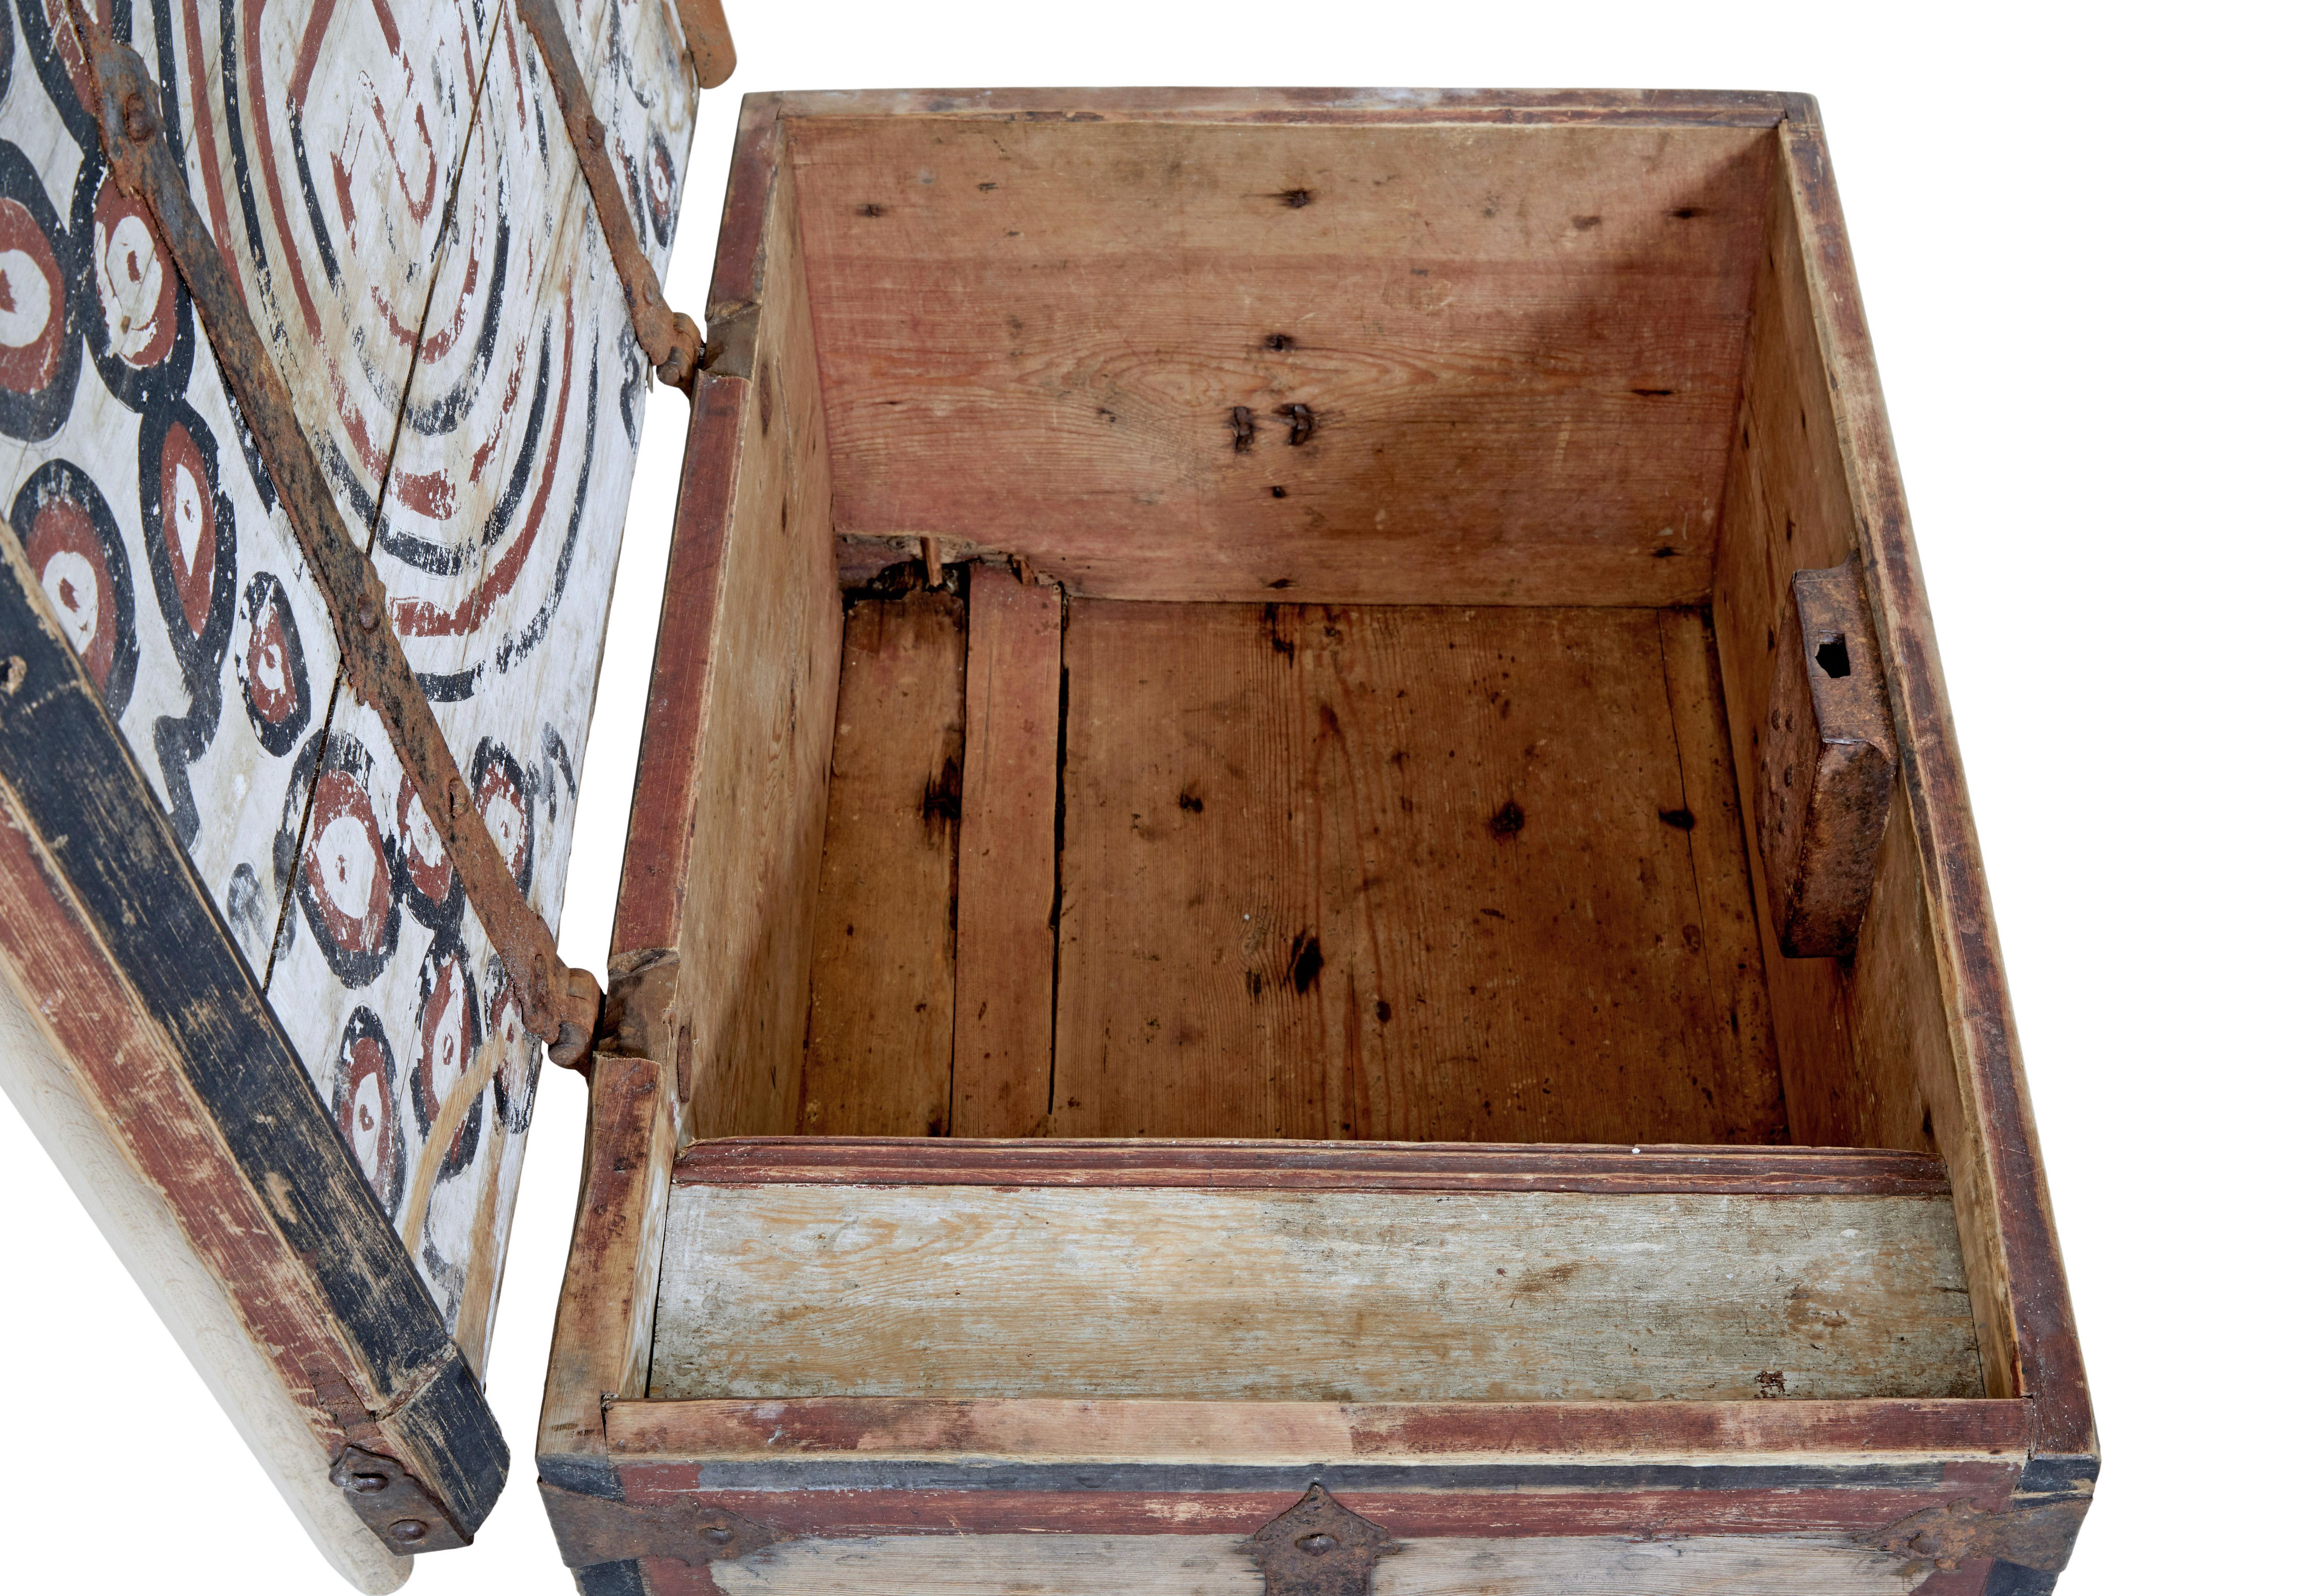 Mid 18th century swedish pine chest decorated with labyrinth circa 1730.

Rare and beautiful Swedish pine chest.   Traces of original paint to the outside with decorative metal strap work and hinges, woodwork has taken on a great patina in its